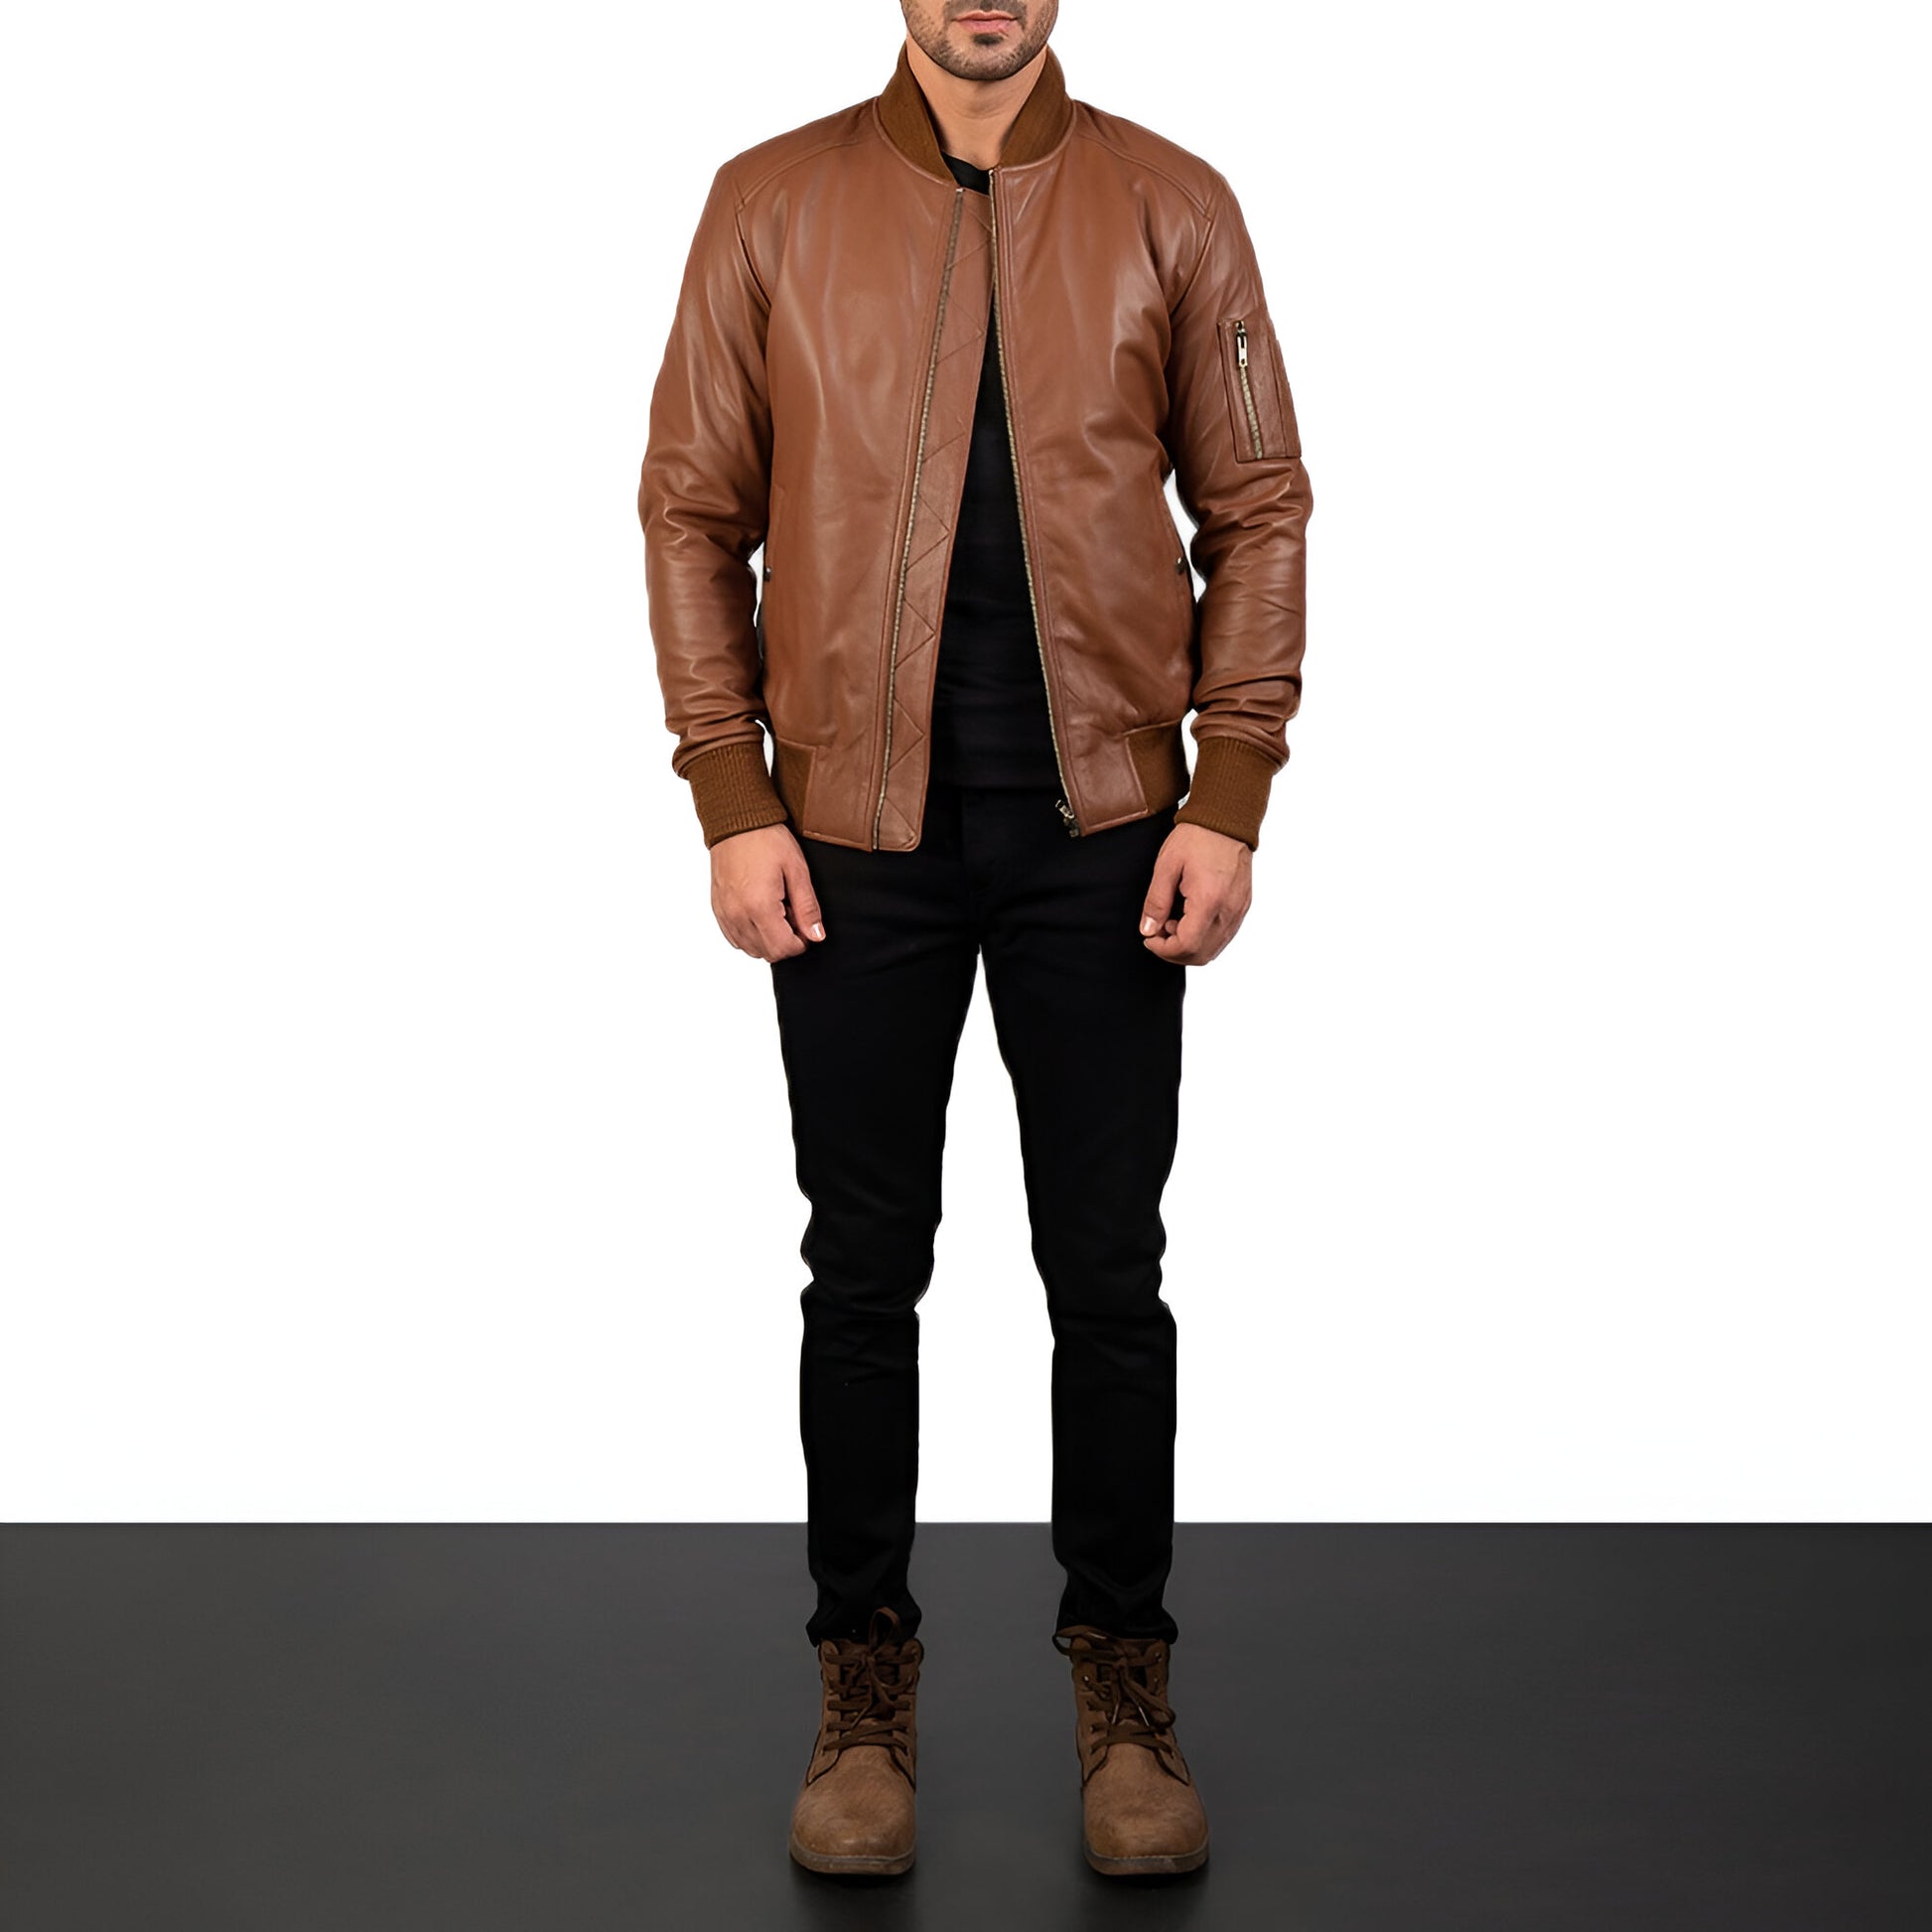 Dicks Leather Brown Leather Bomber Jacket